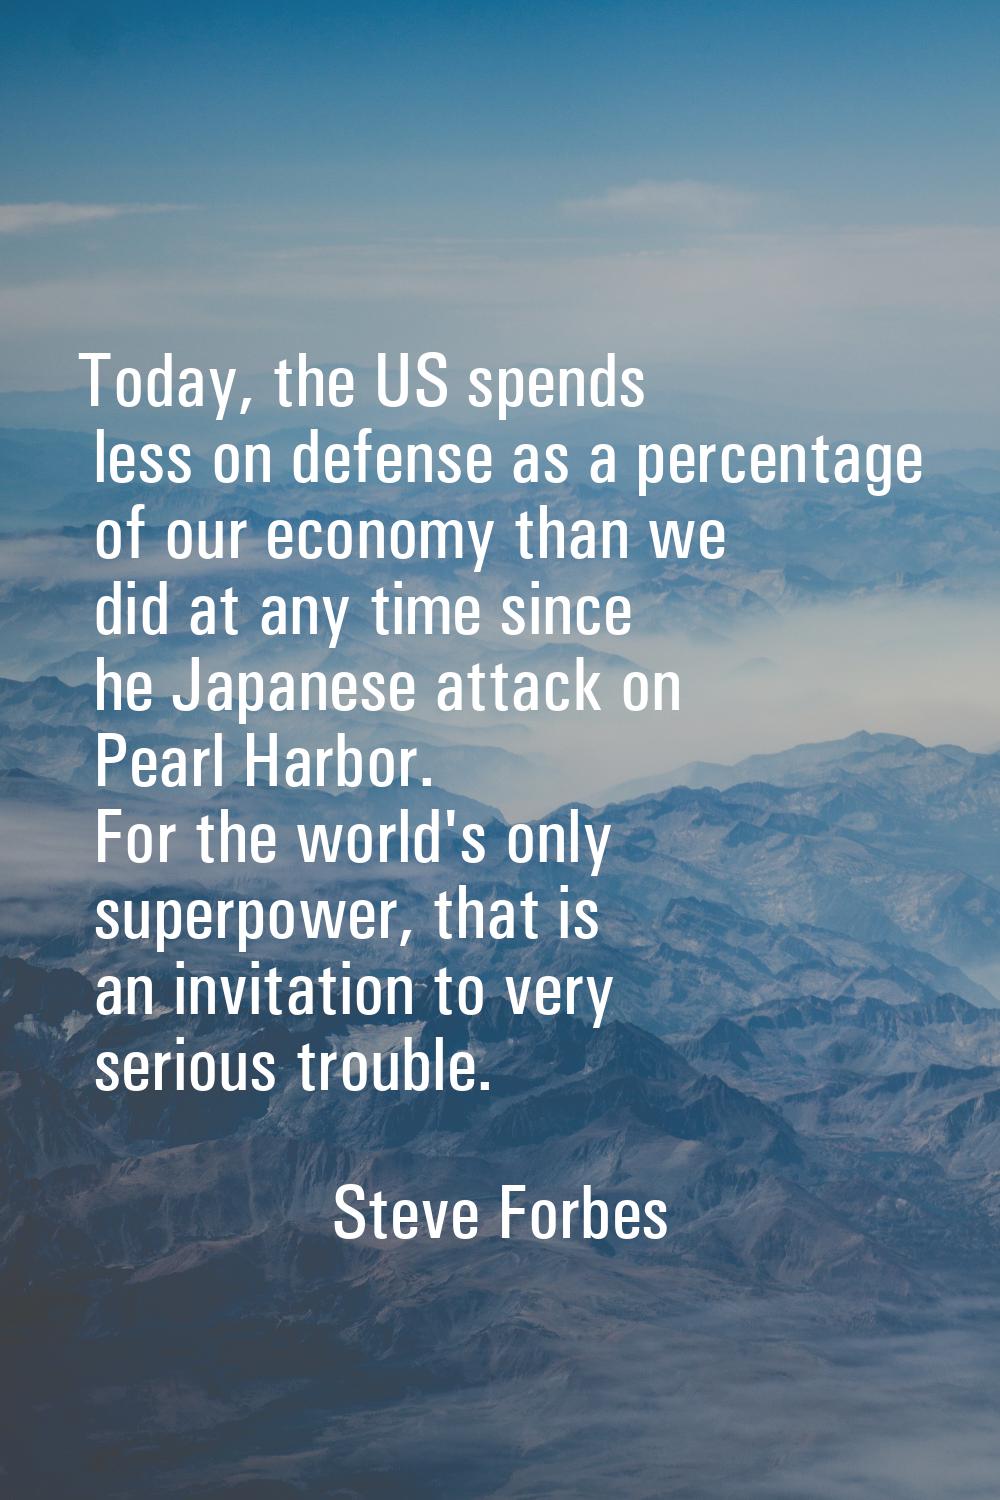 Today, the US spends less on defense as a percentage of our economy than we did at any time since h